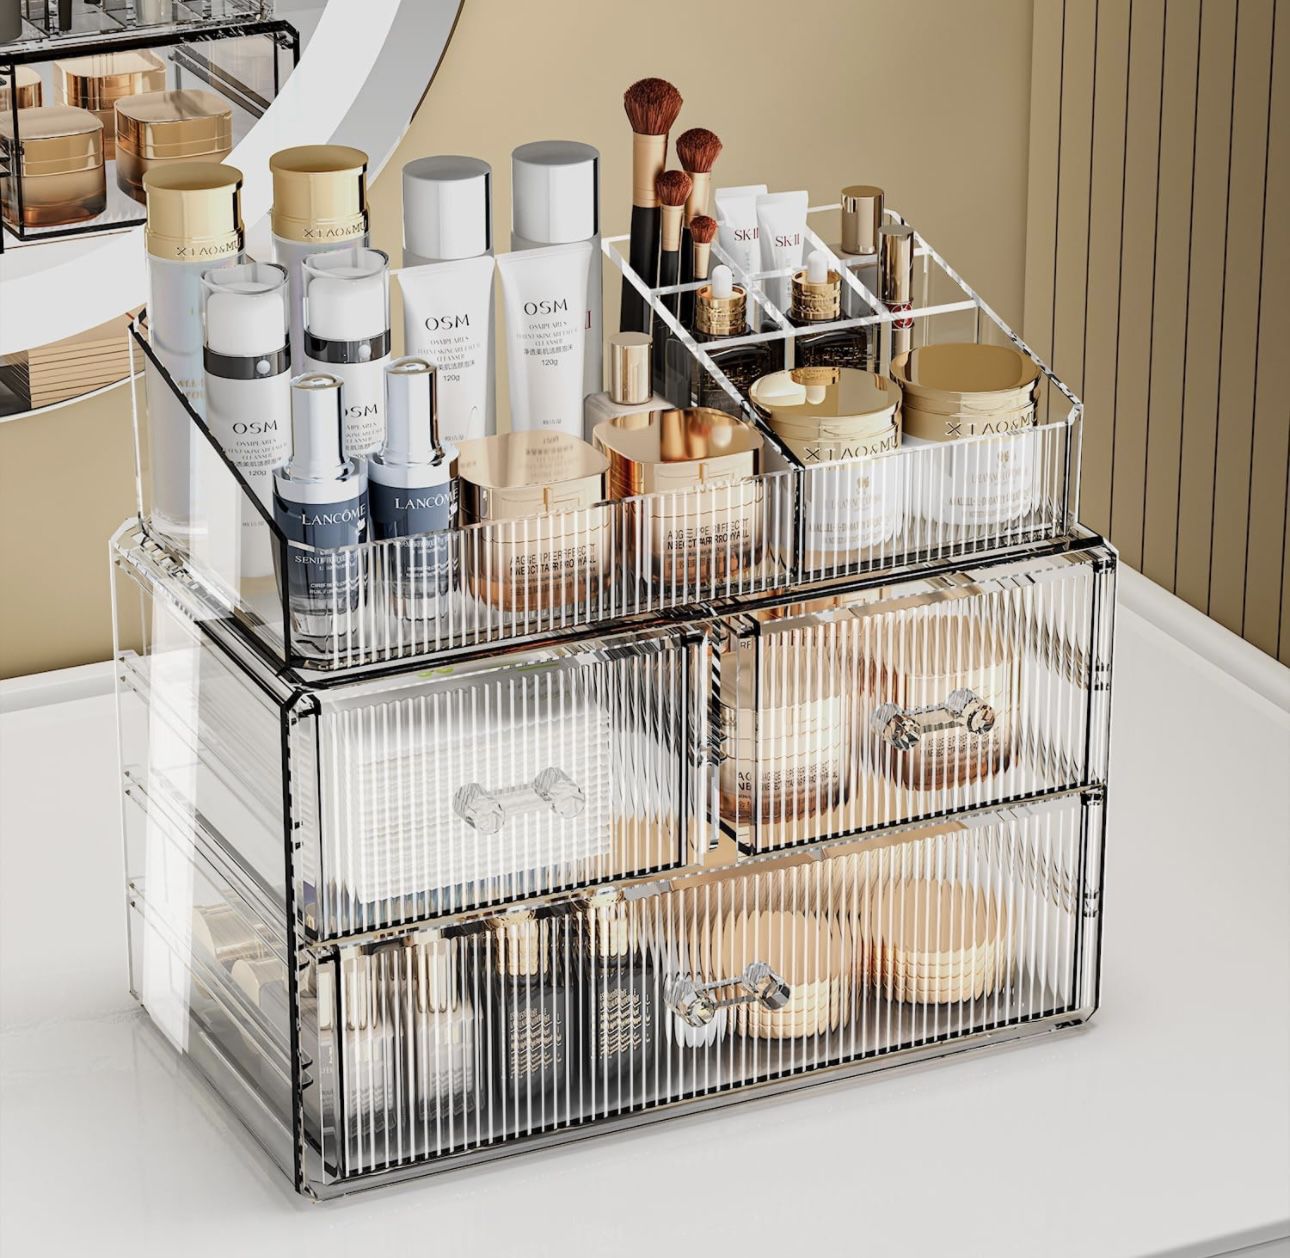 ZHIAI Clear Makeup Organizer for Vanity - Organize Your Beauty Essentials with Make Up Organizers and Storage, Multi-Purpose Bathroom Organizer Jewelr